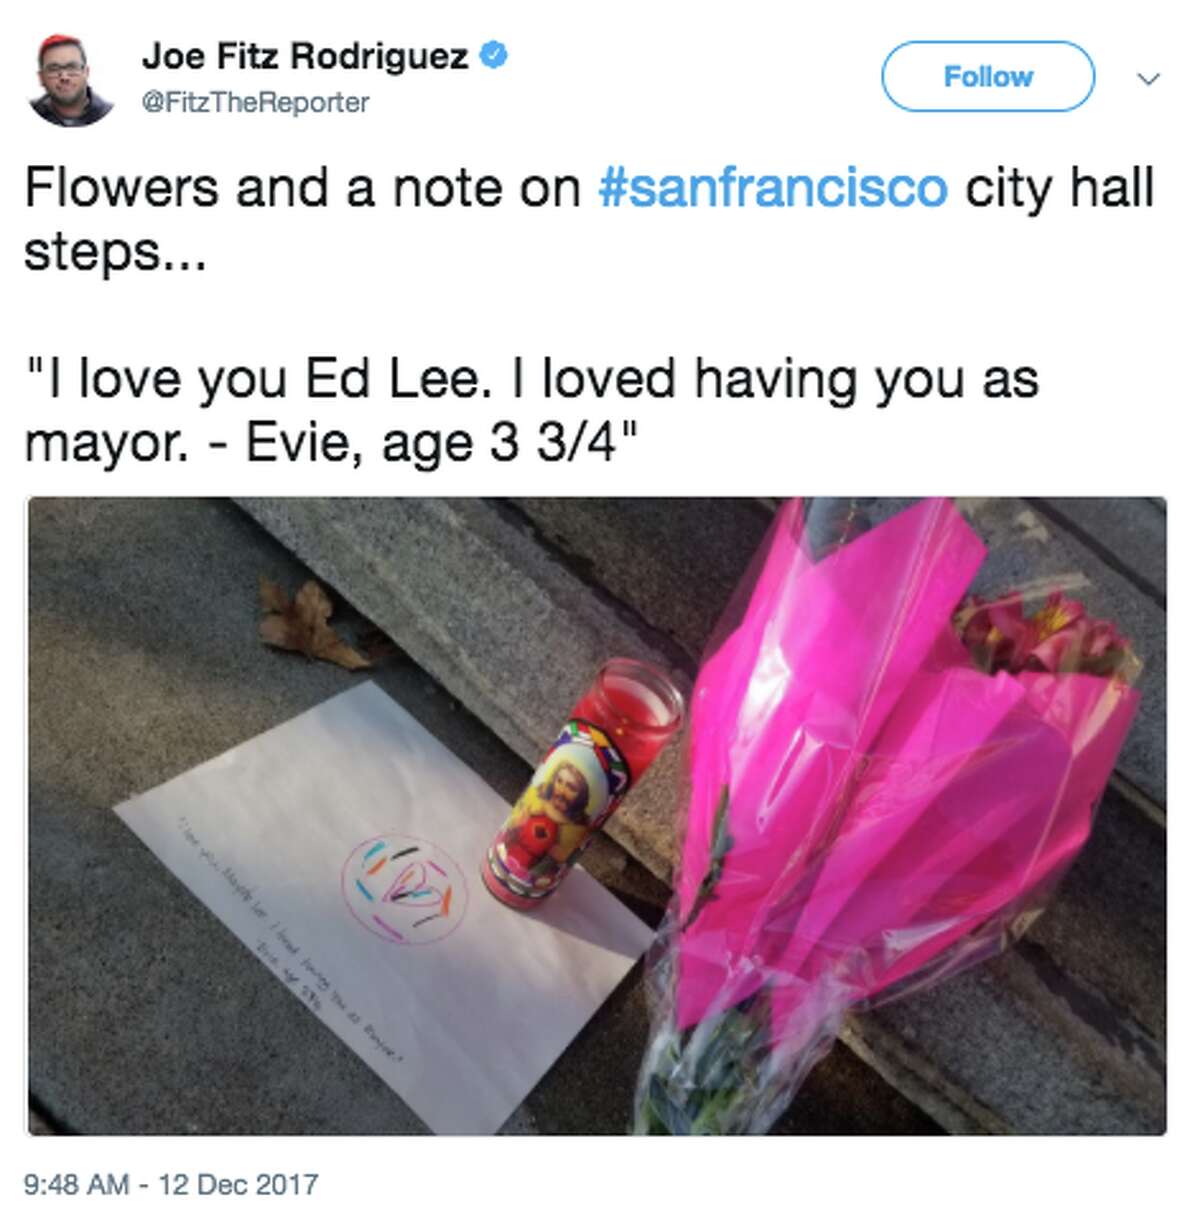 Flags around San Francisco flew at half-staff and many left flowers and notes at City Hall to honor San Francisco Mayor Ed Lee who passed away early Tuesday morning.